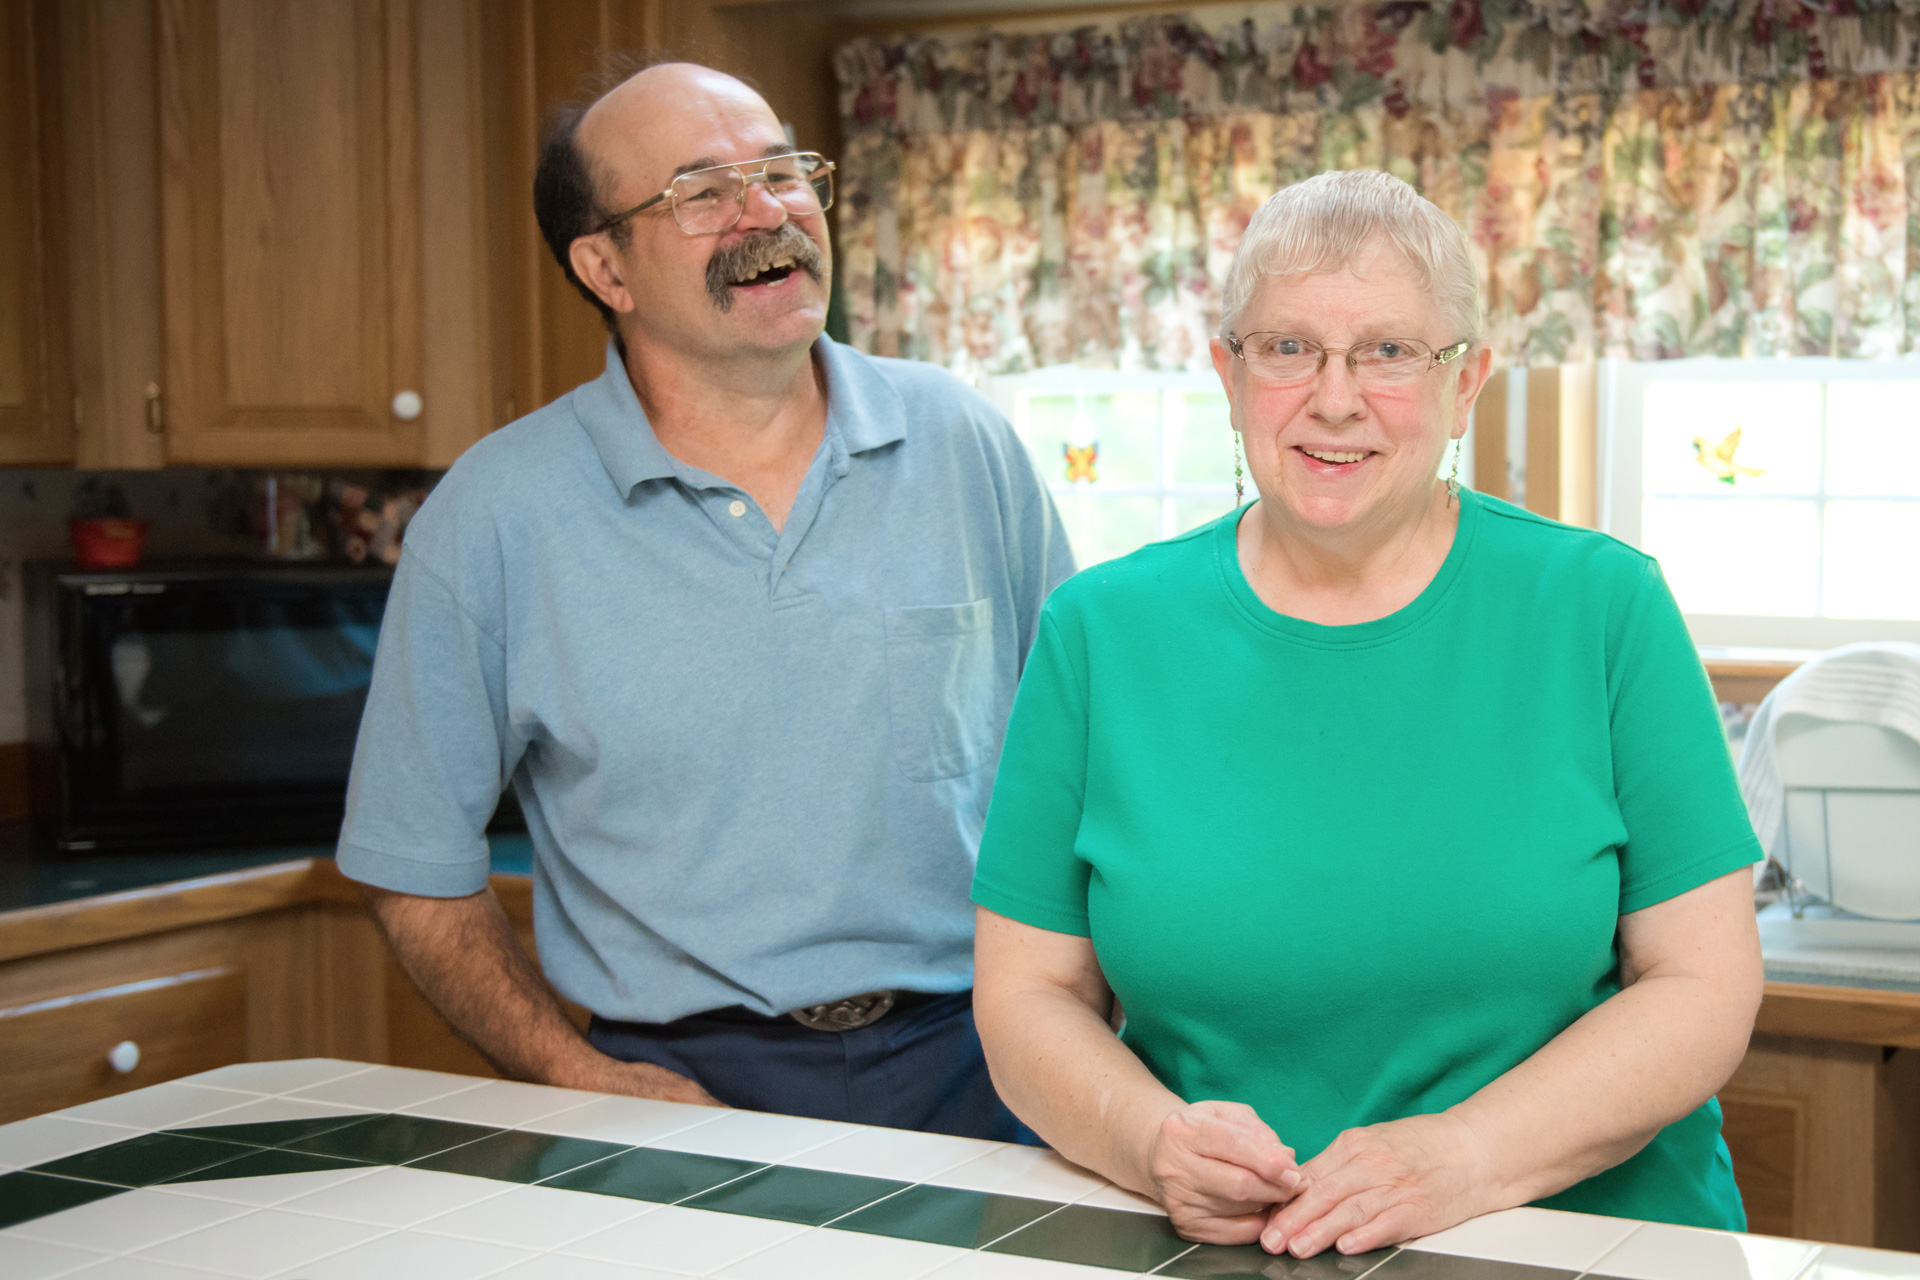 Man and woman stand at kitchen counter; man is laughing